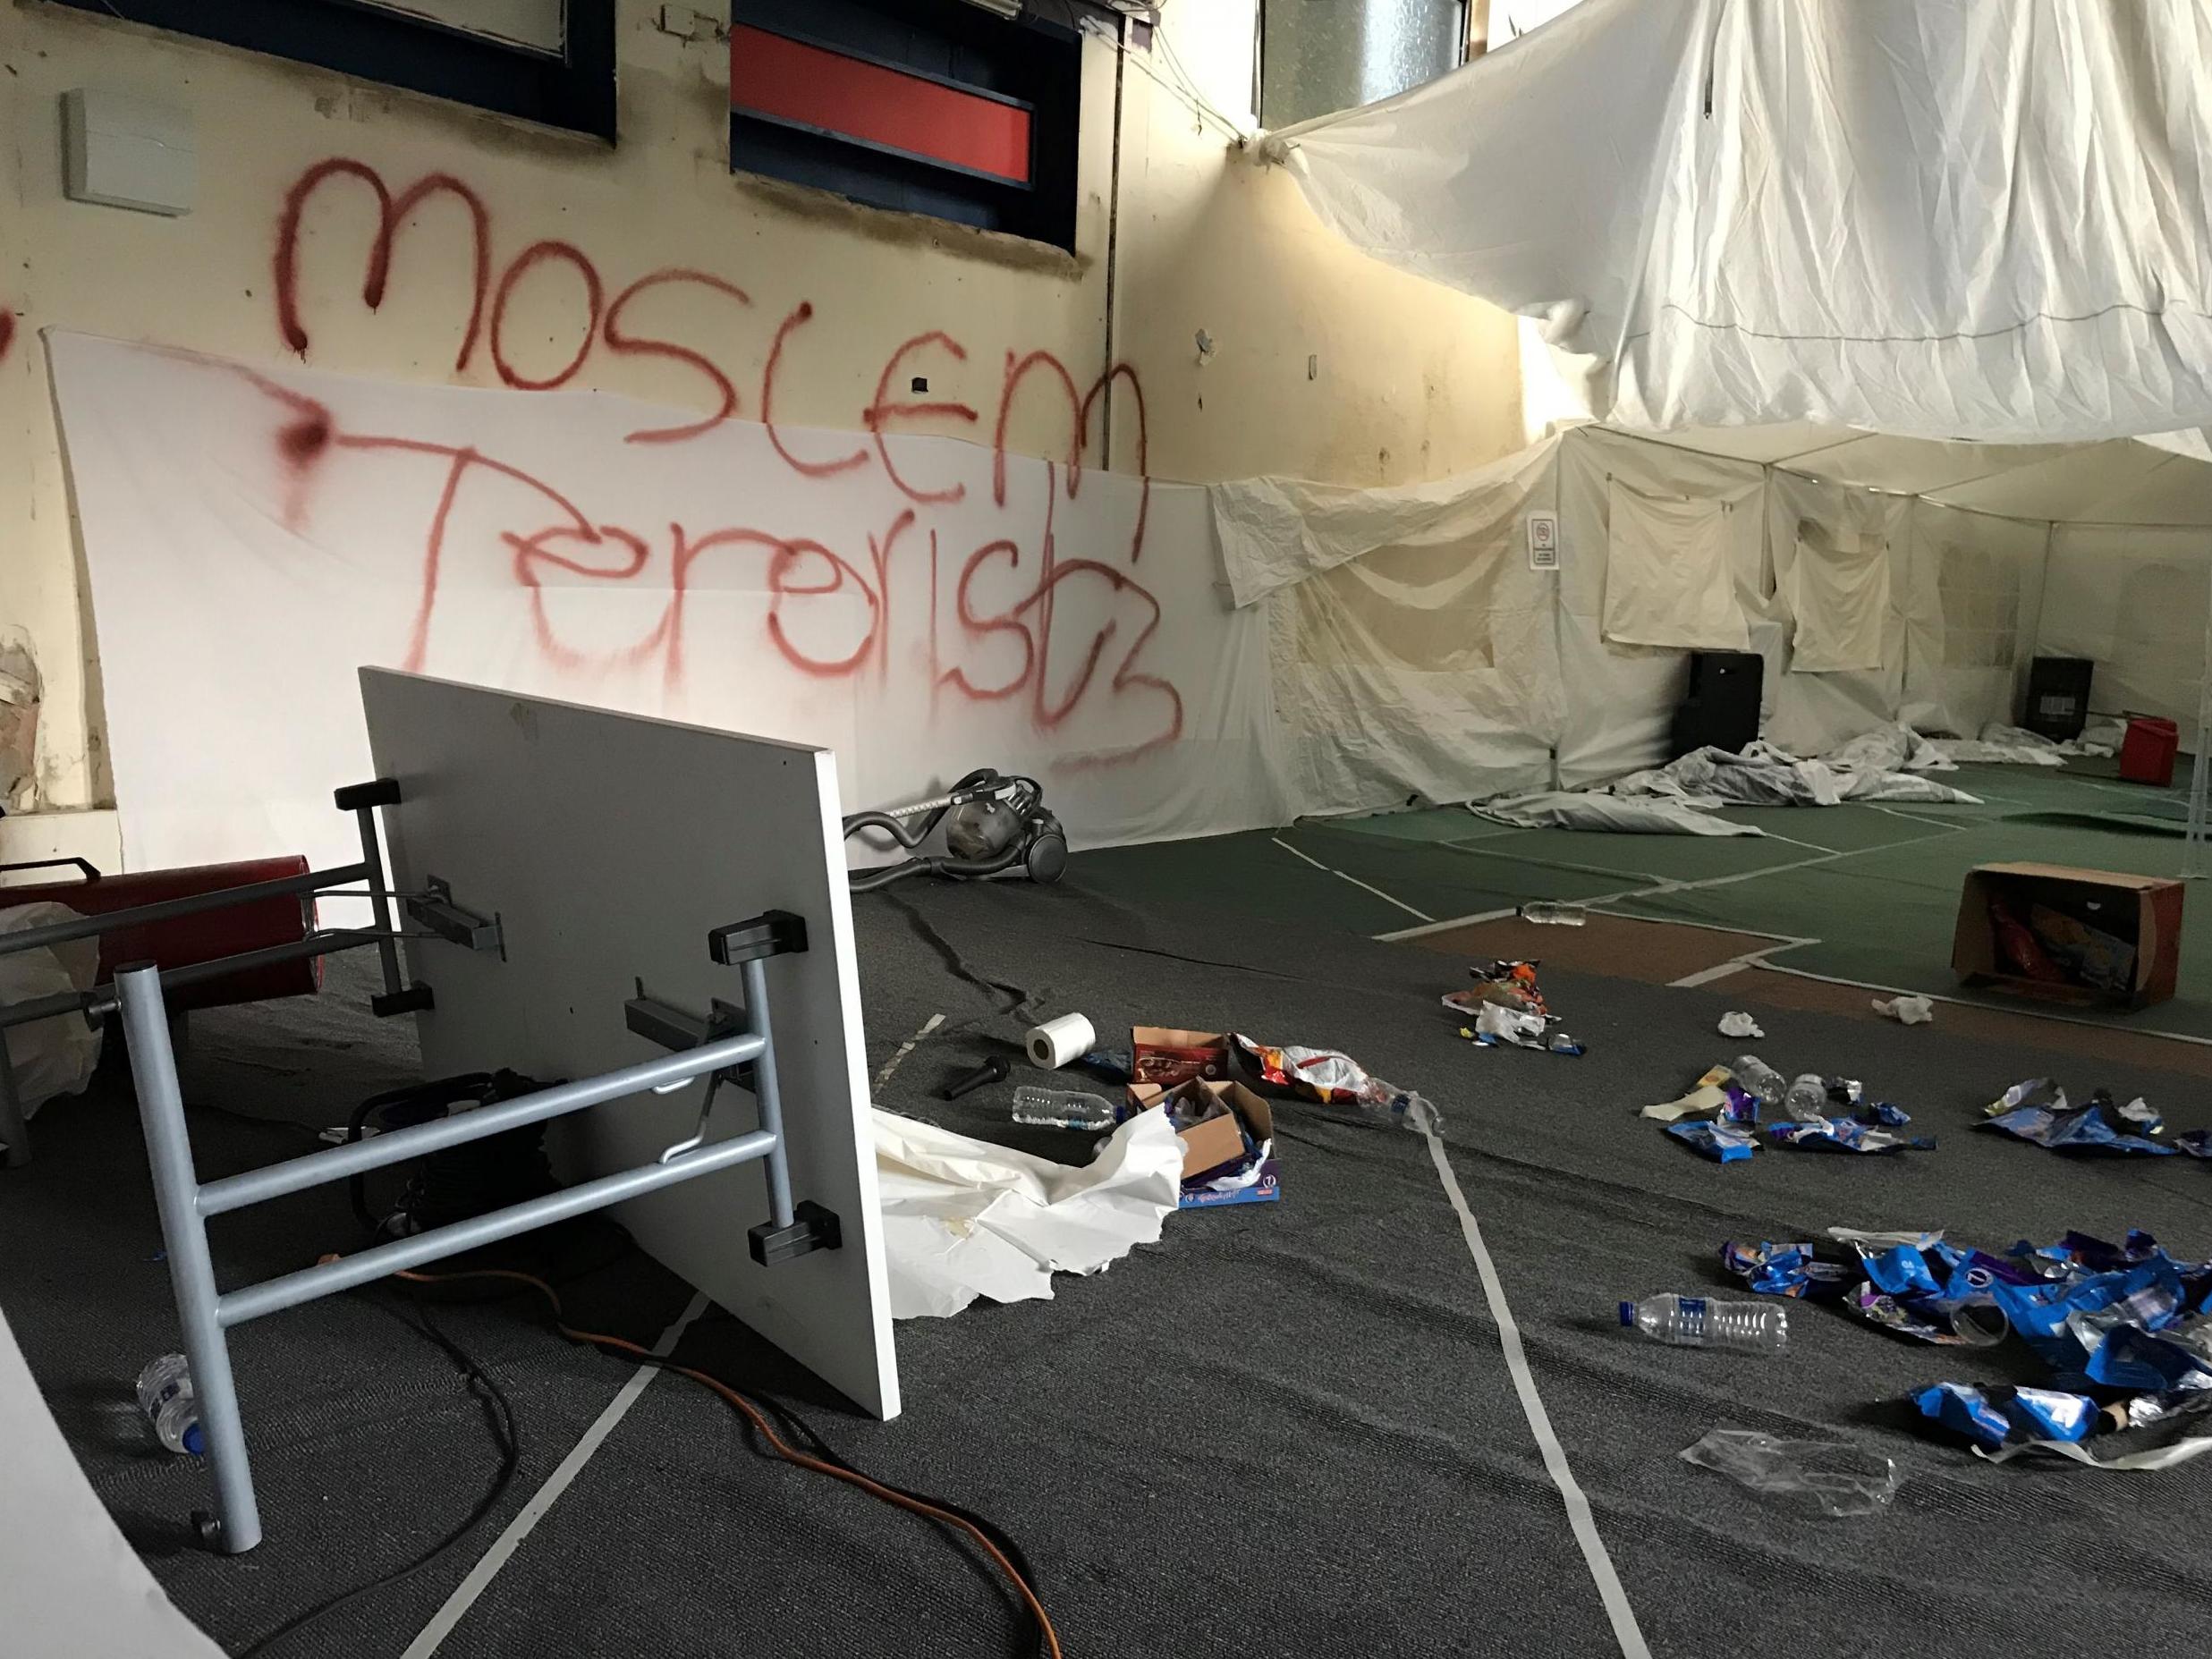 The building of Bahr Academy in Newcastle was targeted by vandals